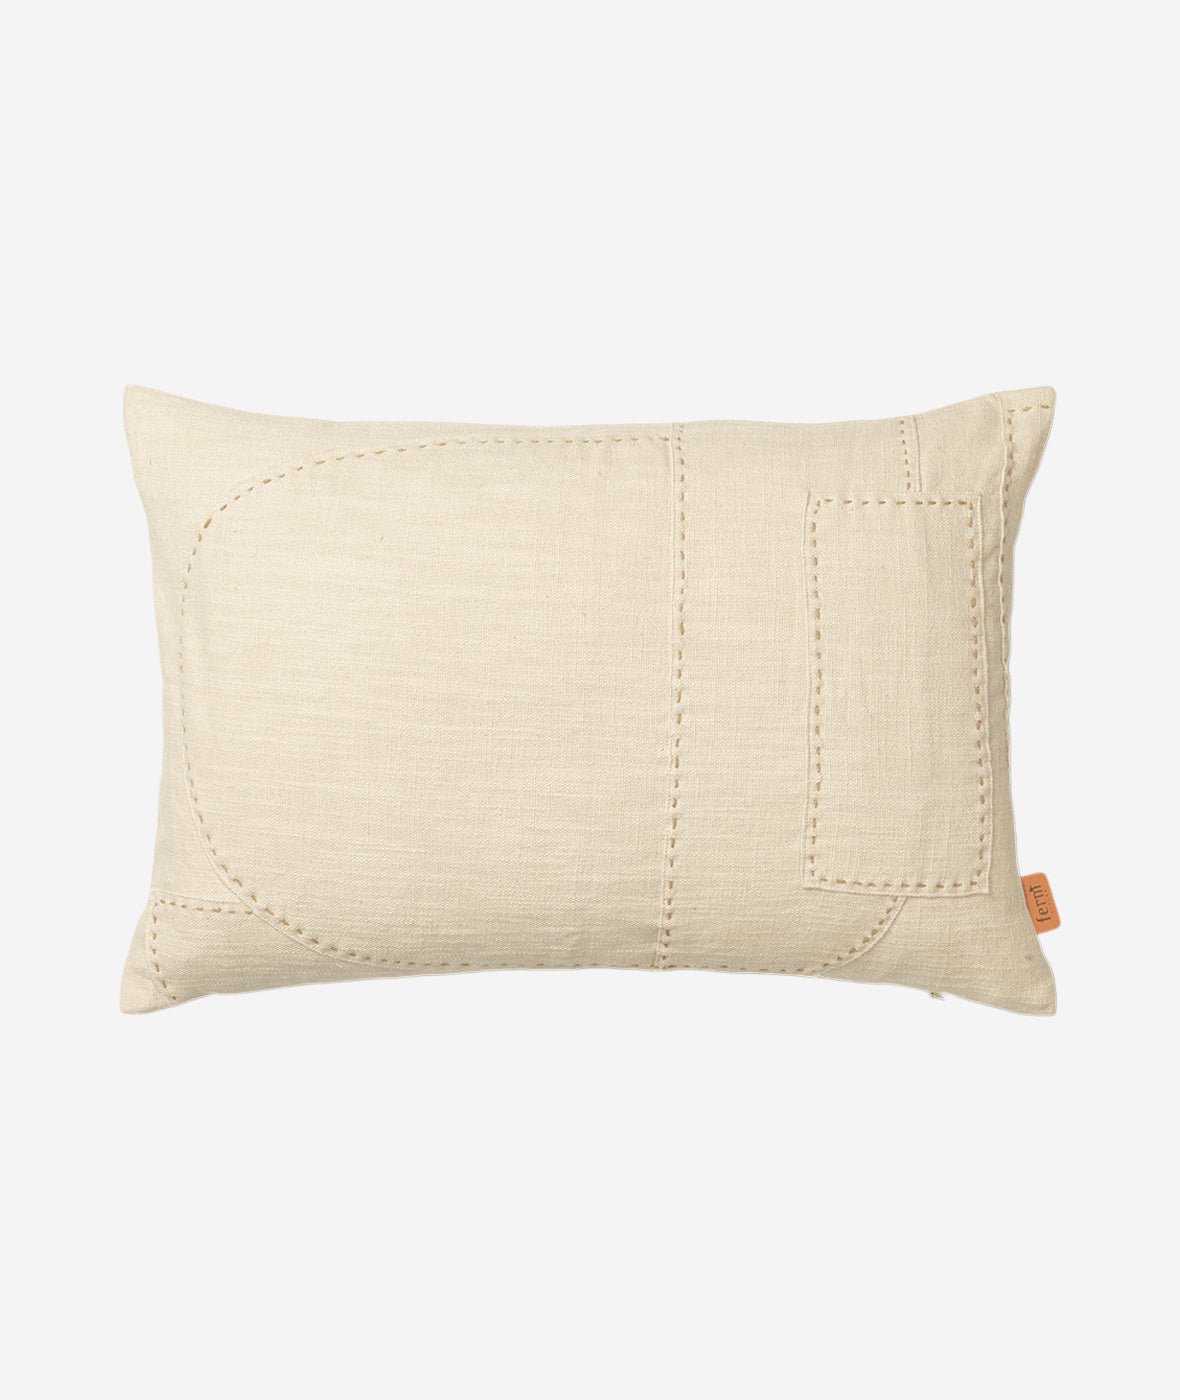 Darn Pillow - More Options